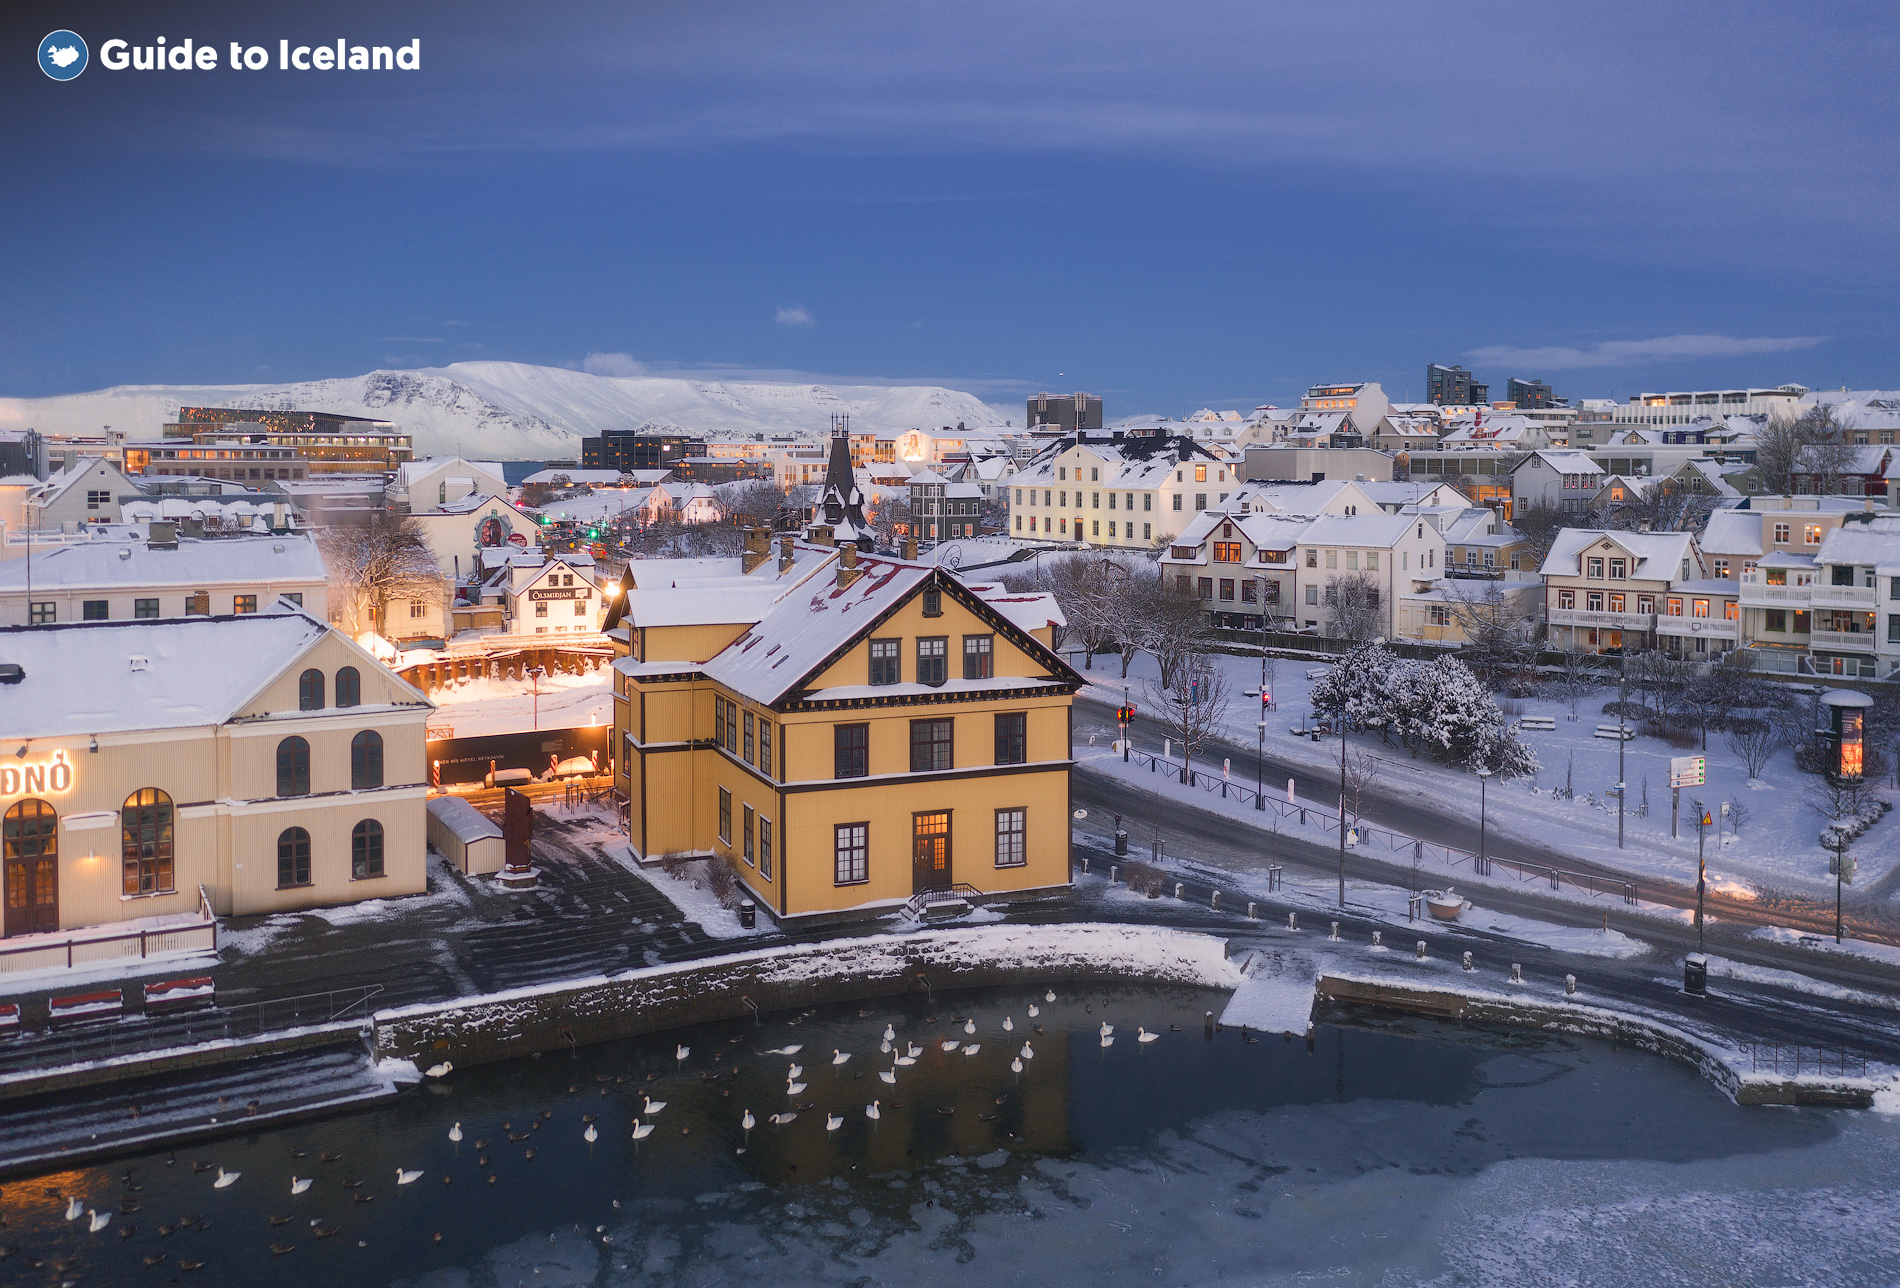 The centre of Reykjavik is a bustling place even in winter.